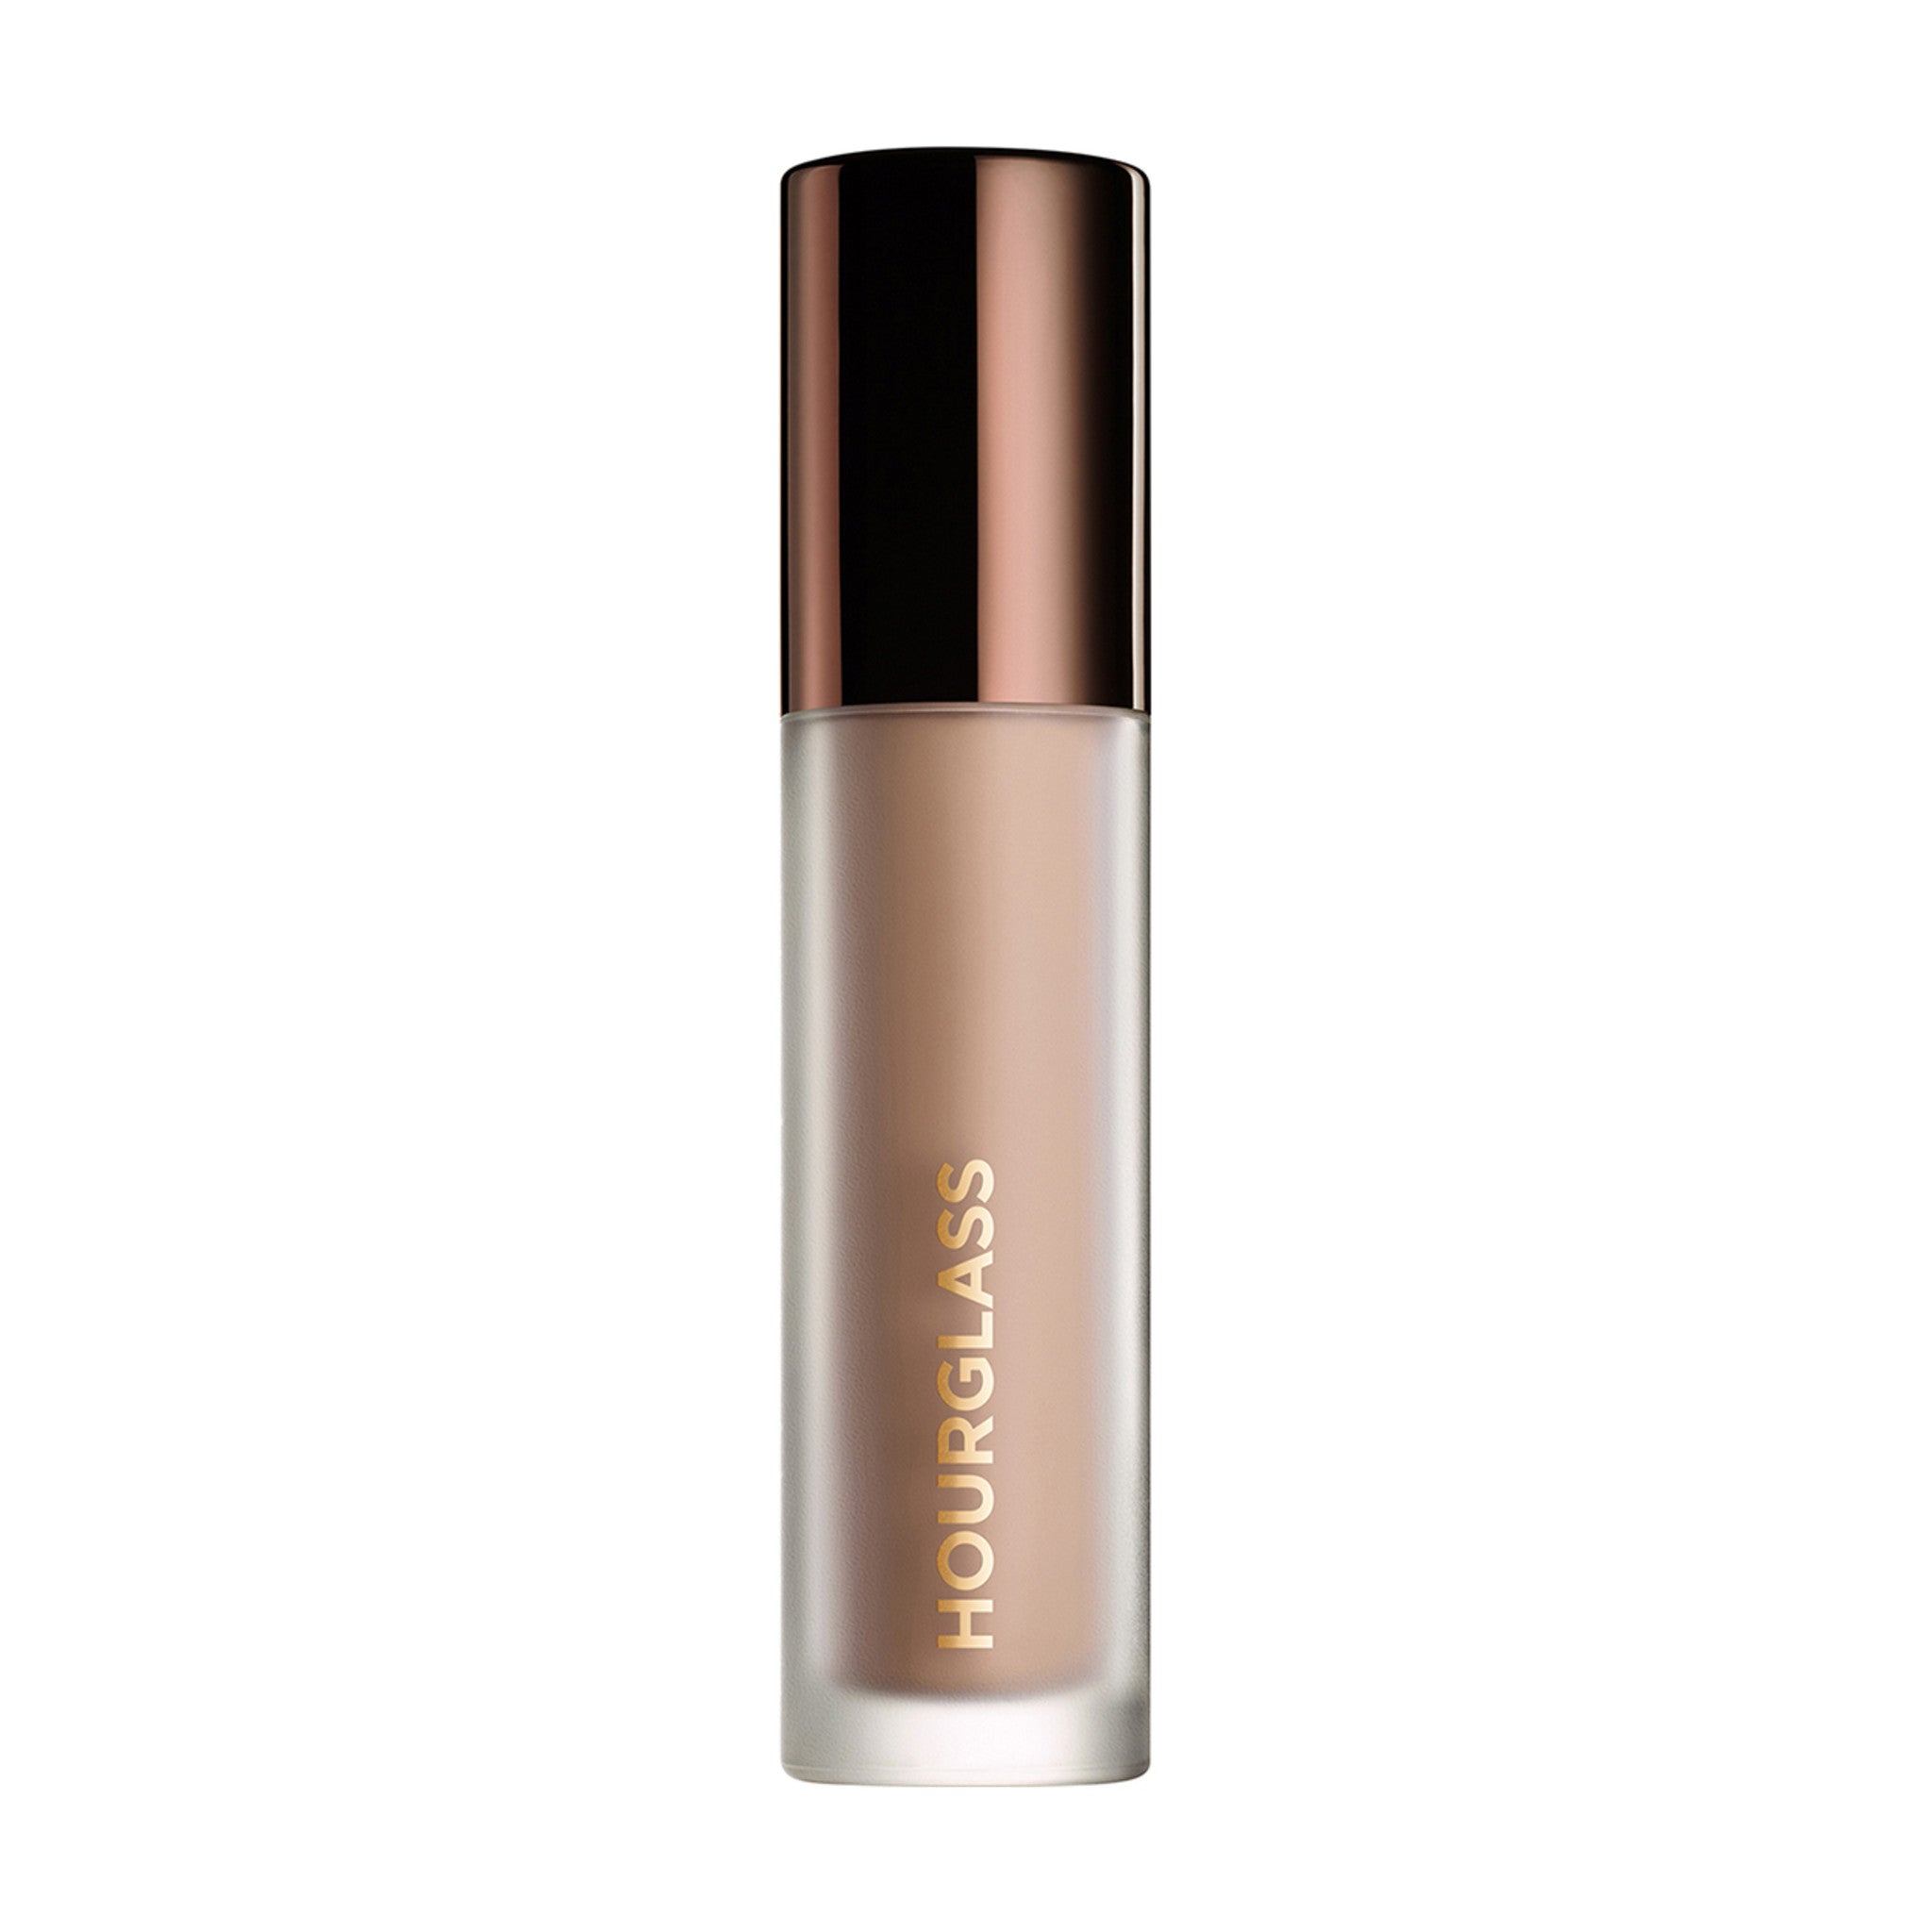 Hourglass Veil Retouching Fluid Color/Shade variant: Natural main image. This product is for light neutral complexions